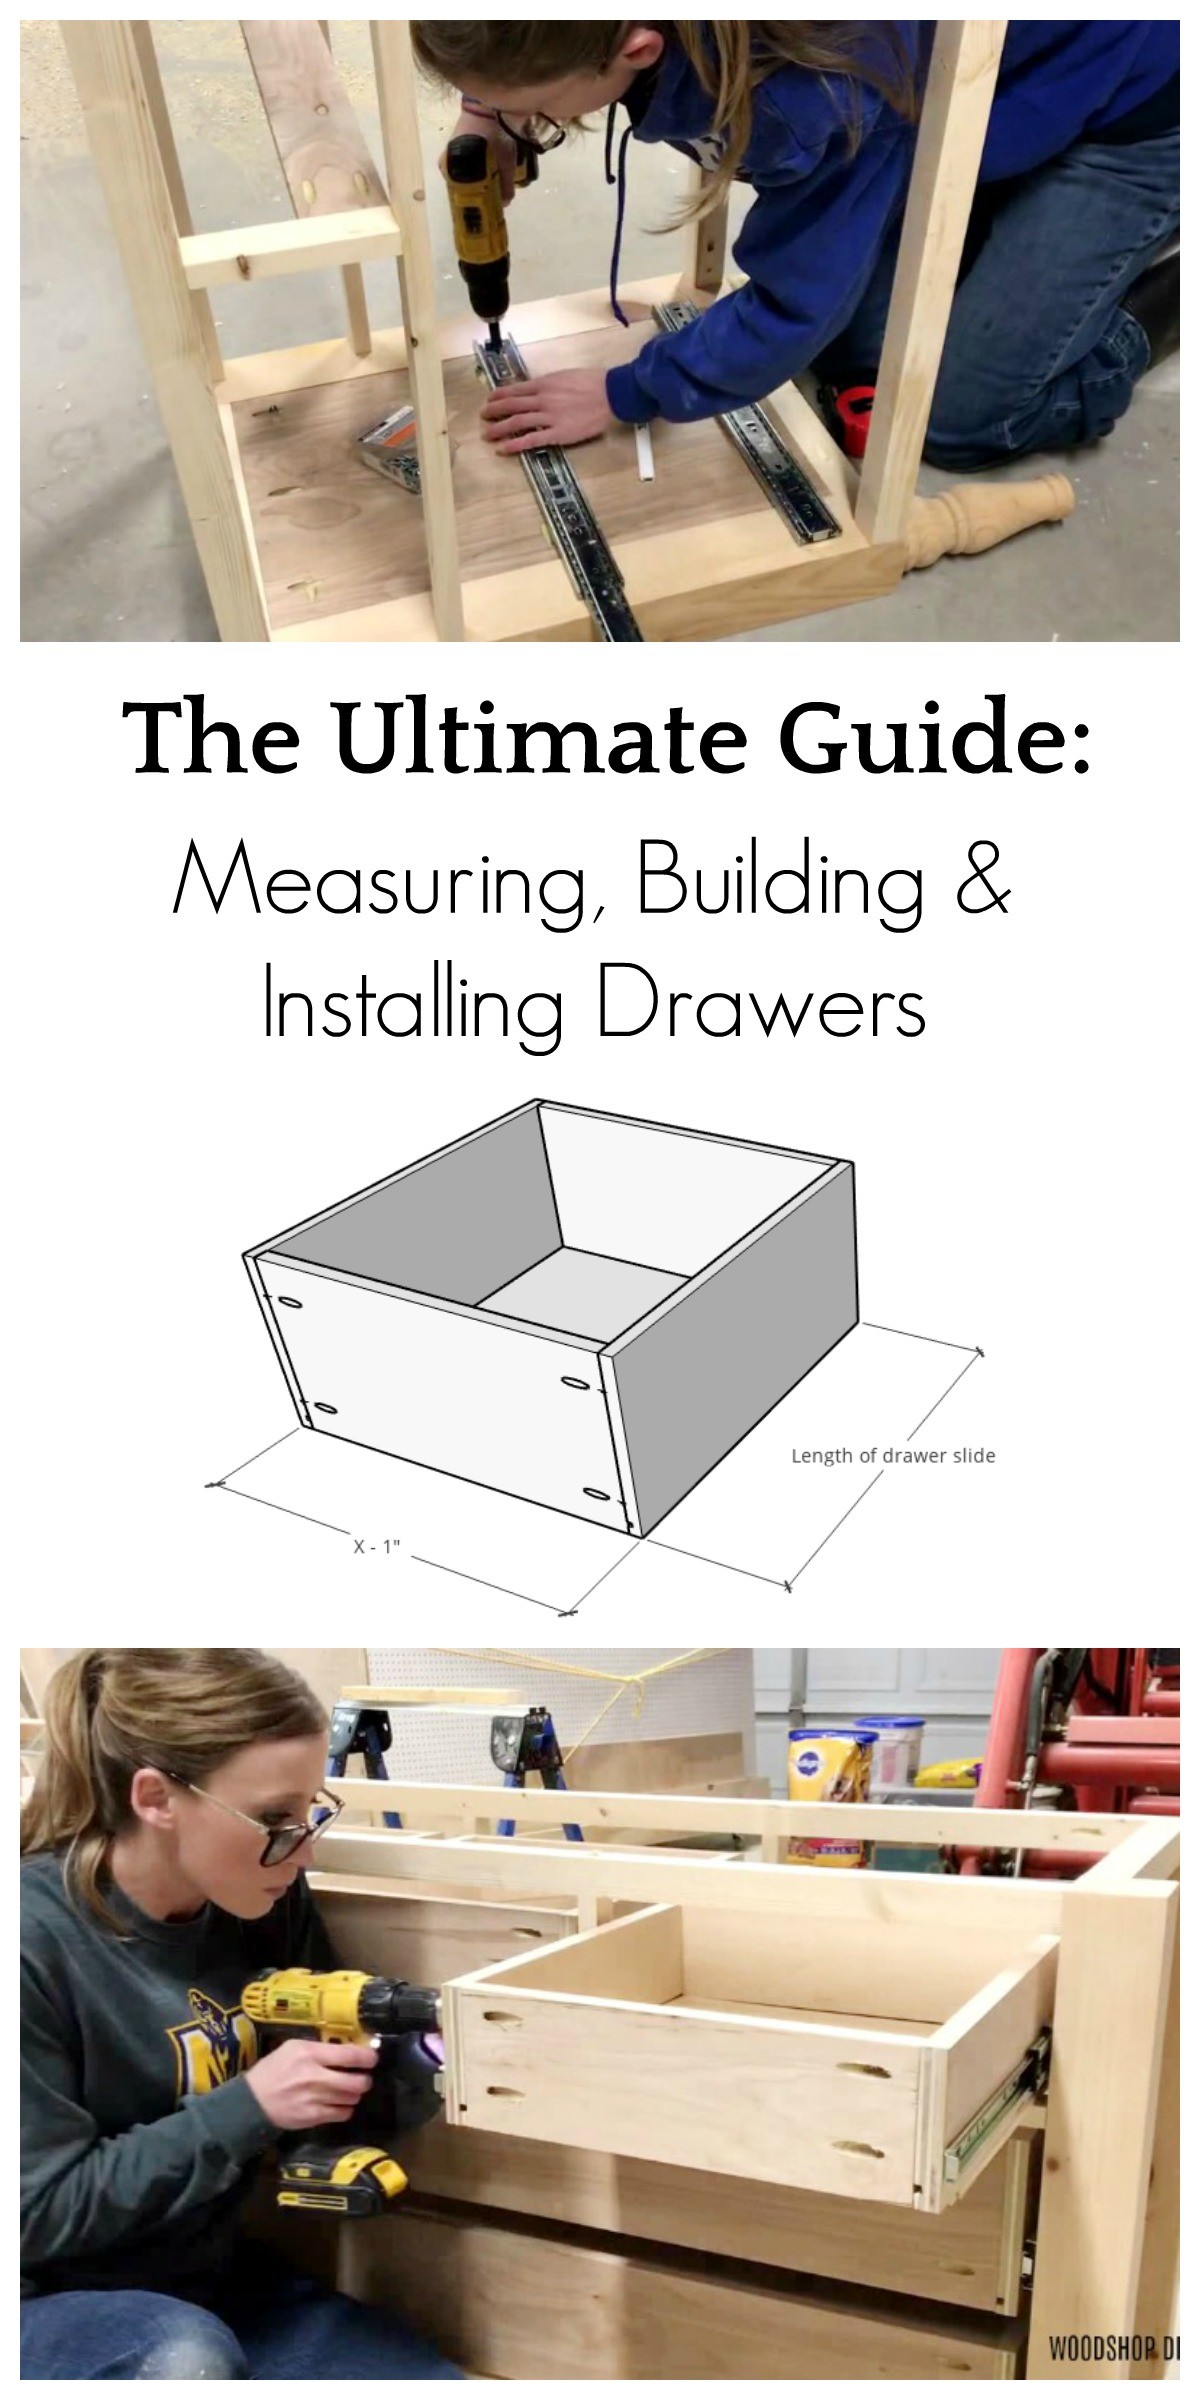 https://www.woodshopdiaries.com/wp-content/uploads/2016/06/How-to-Build-Drawers-Pin-Image.jpg